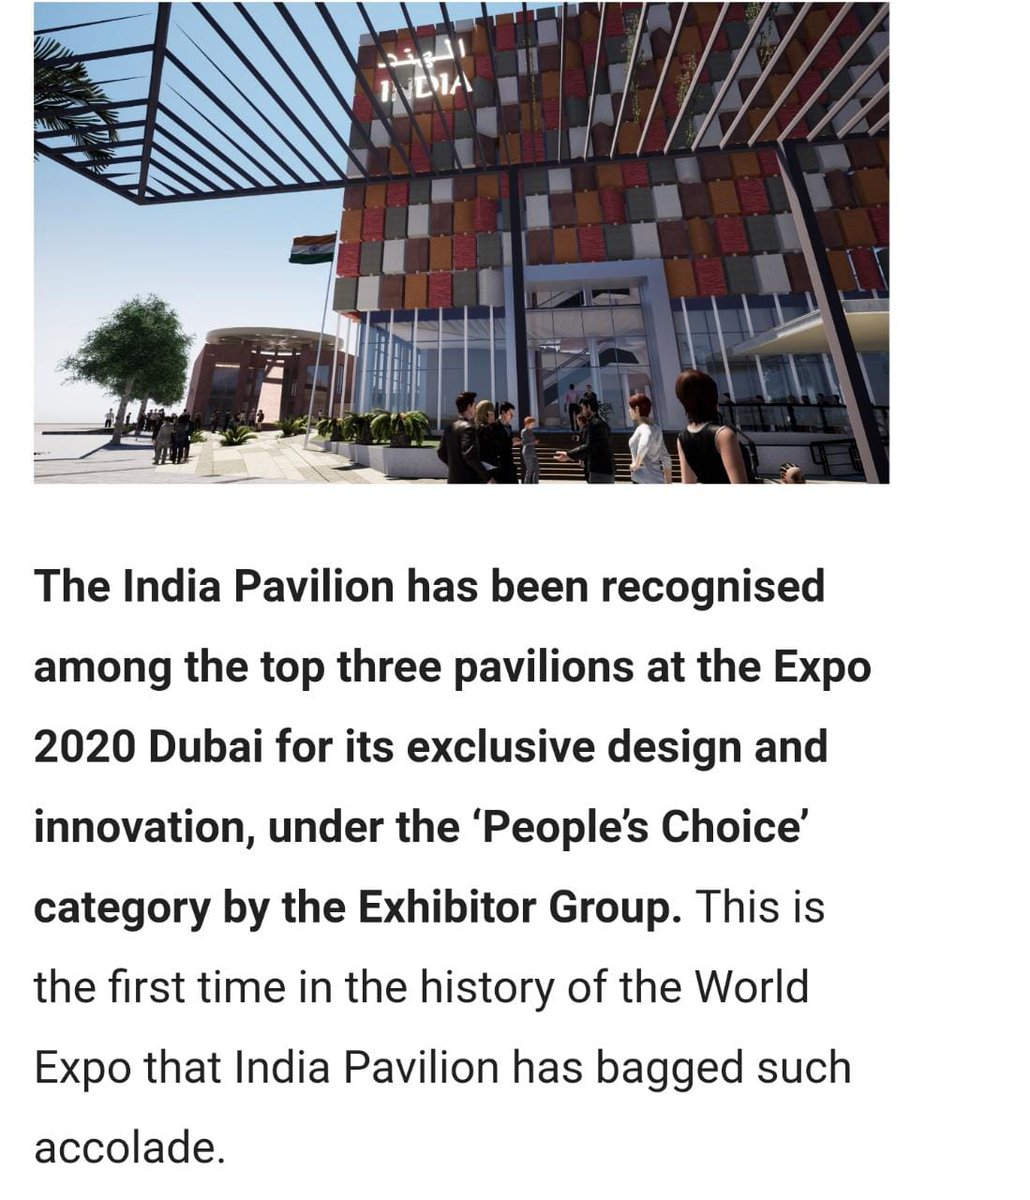 India Pavilion @Expo2020Dubai crafts a special place in the hearts of visitors. It is among the top 3 pavilions for design & innovation under the ‘People’s Choice’ category. New India has emerged as a rising star. #IndiaAtDubaiExpo